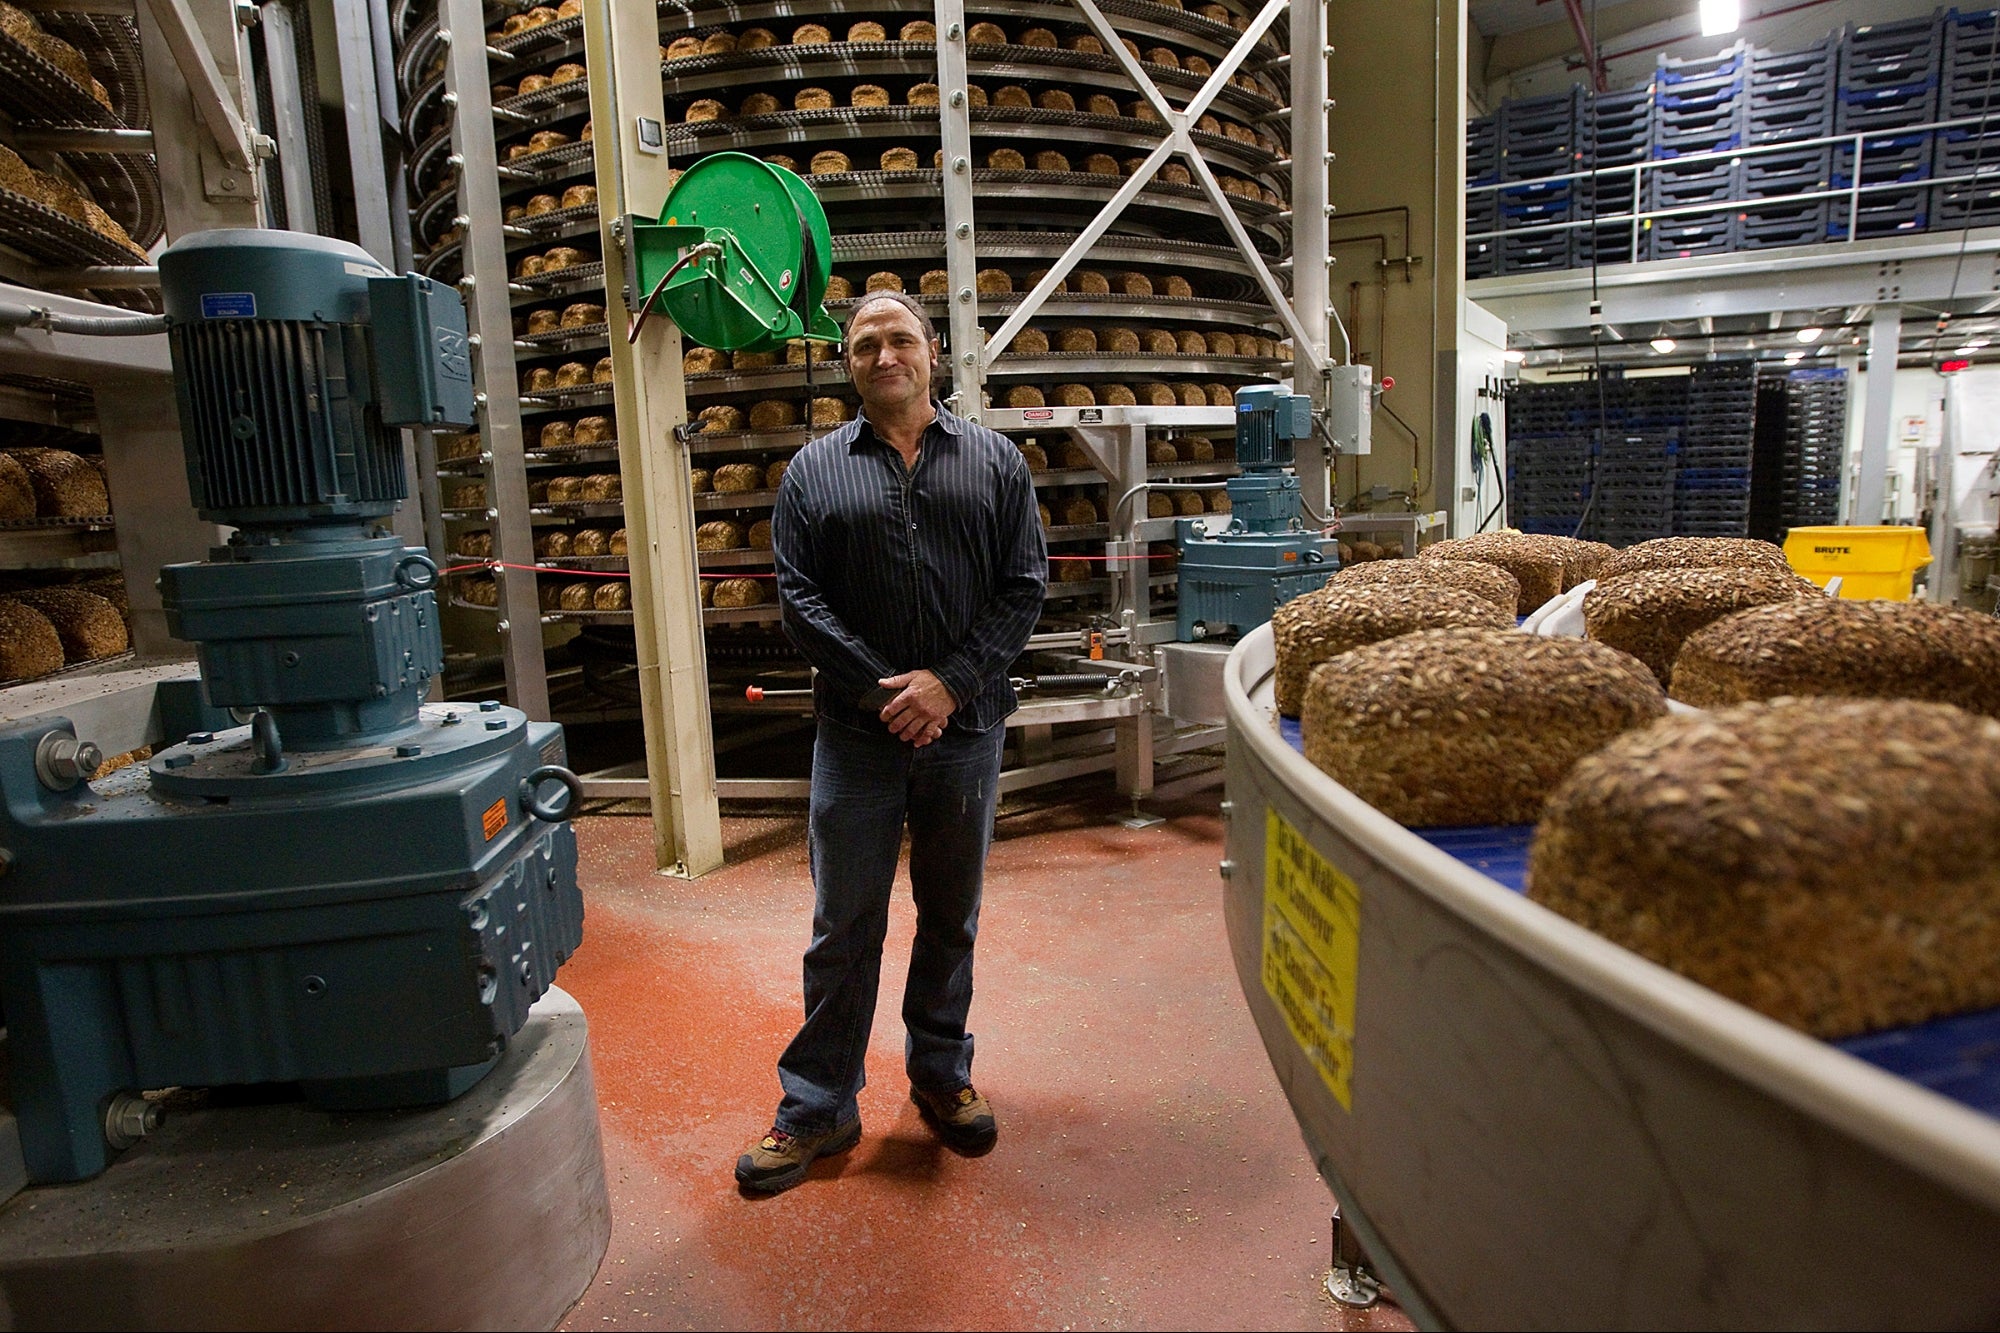 How the Founder of Dave's Killer Bread Went From Jail to Selling His Business for $275 Million